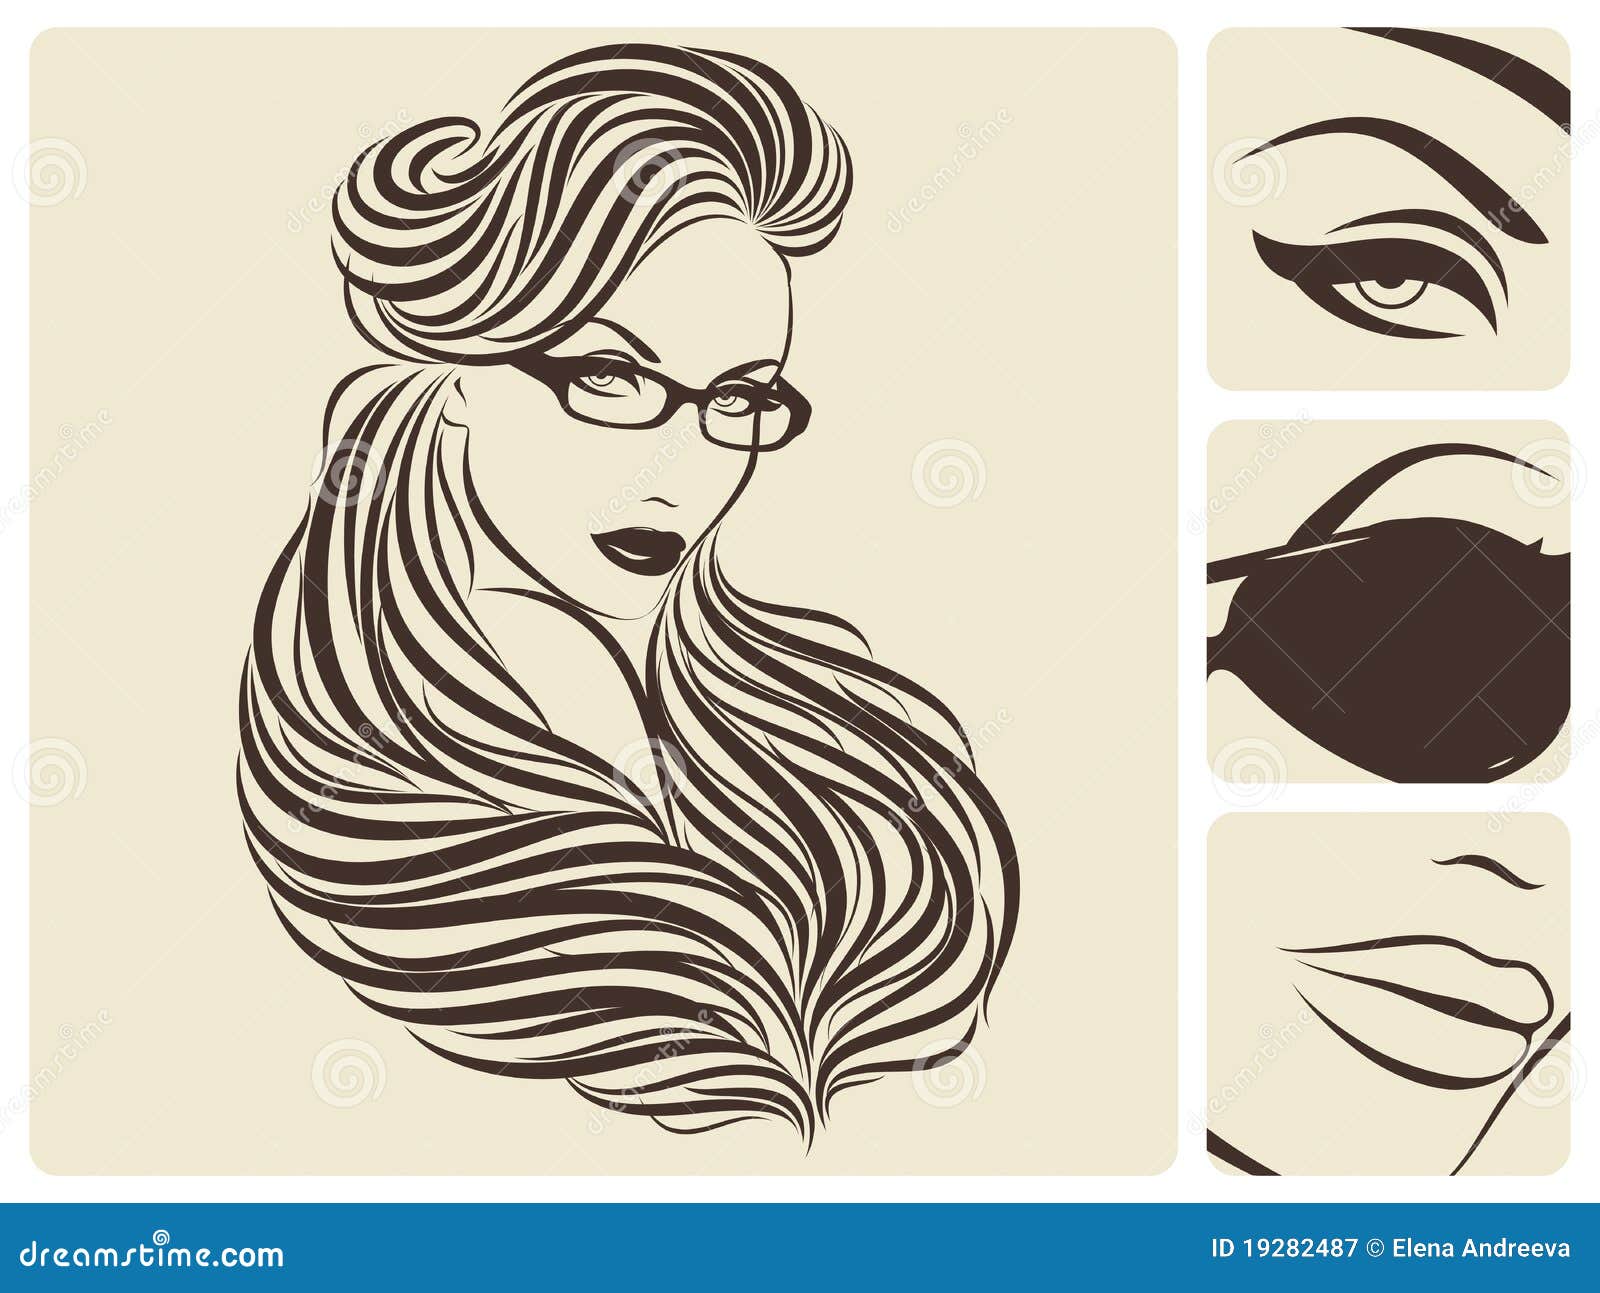 hairstyle clipart free download - photo #39